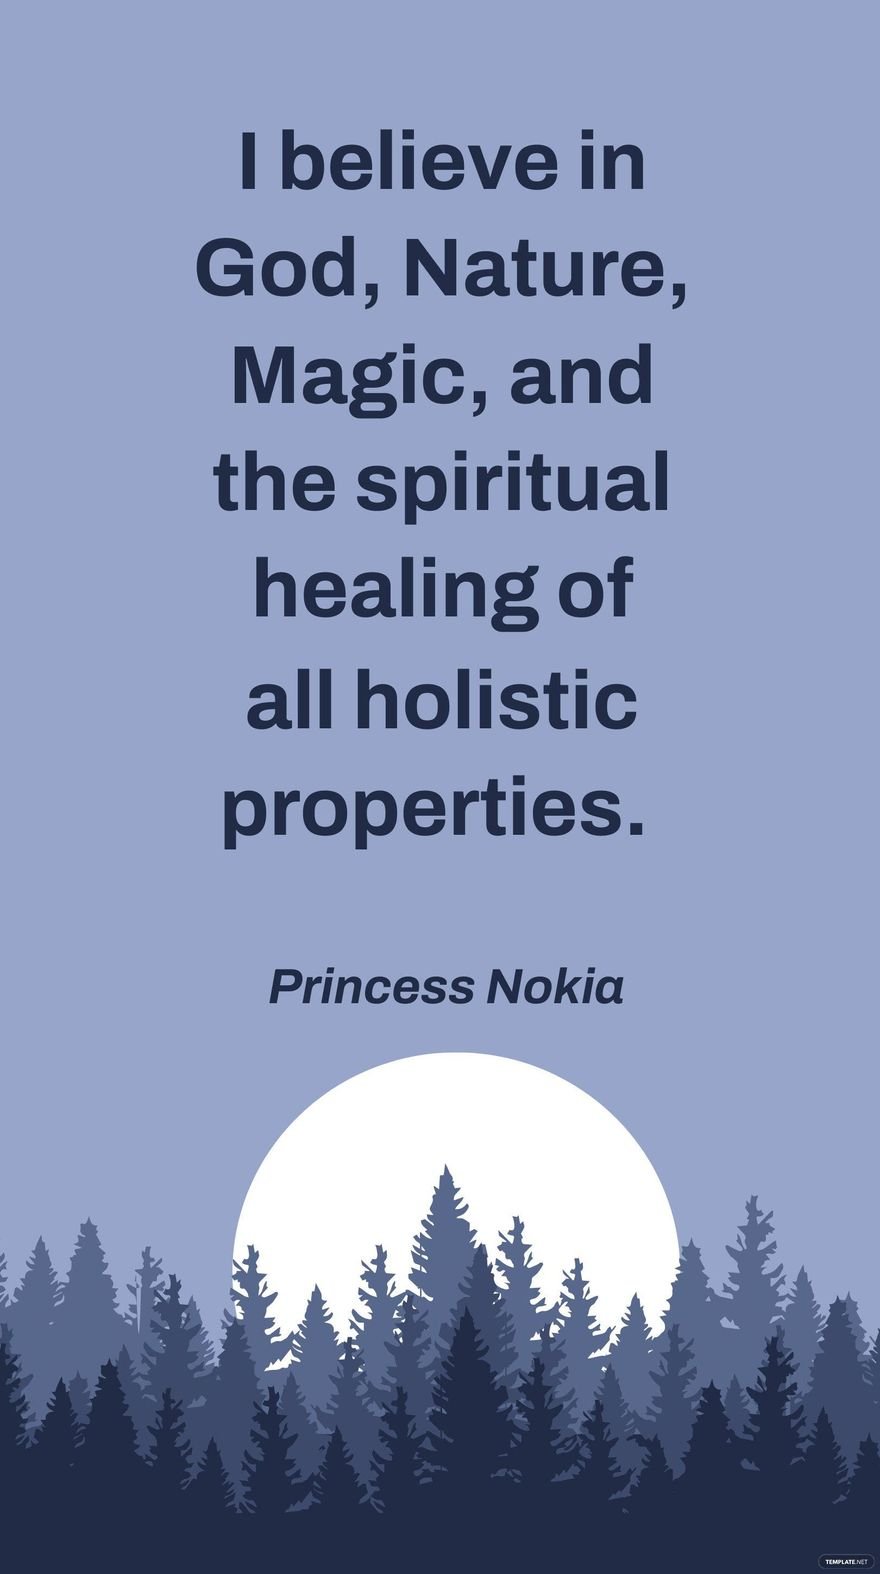 Free Princess Nokia - I believe in God, Nature, Magic, and the spiritual healing of all holistic properties. in JPG